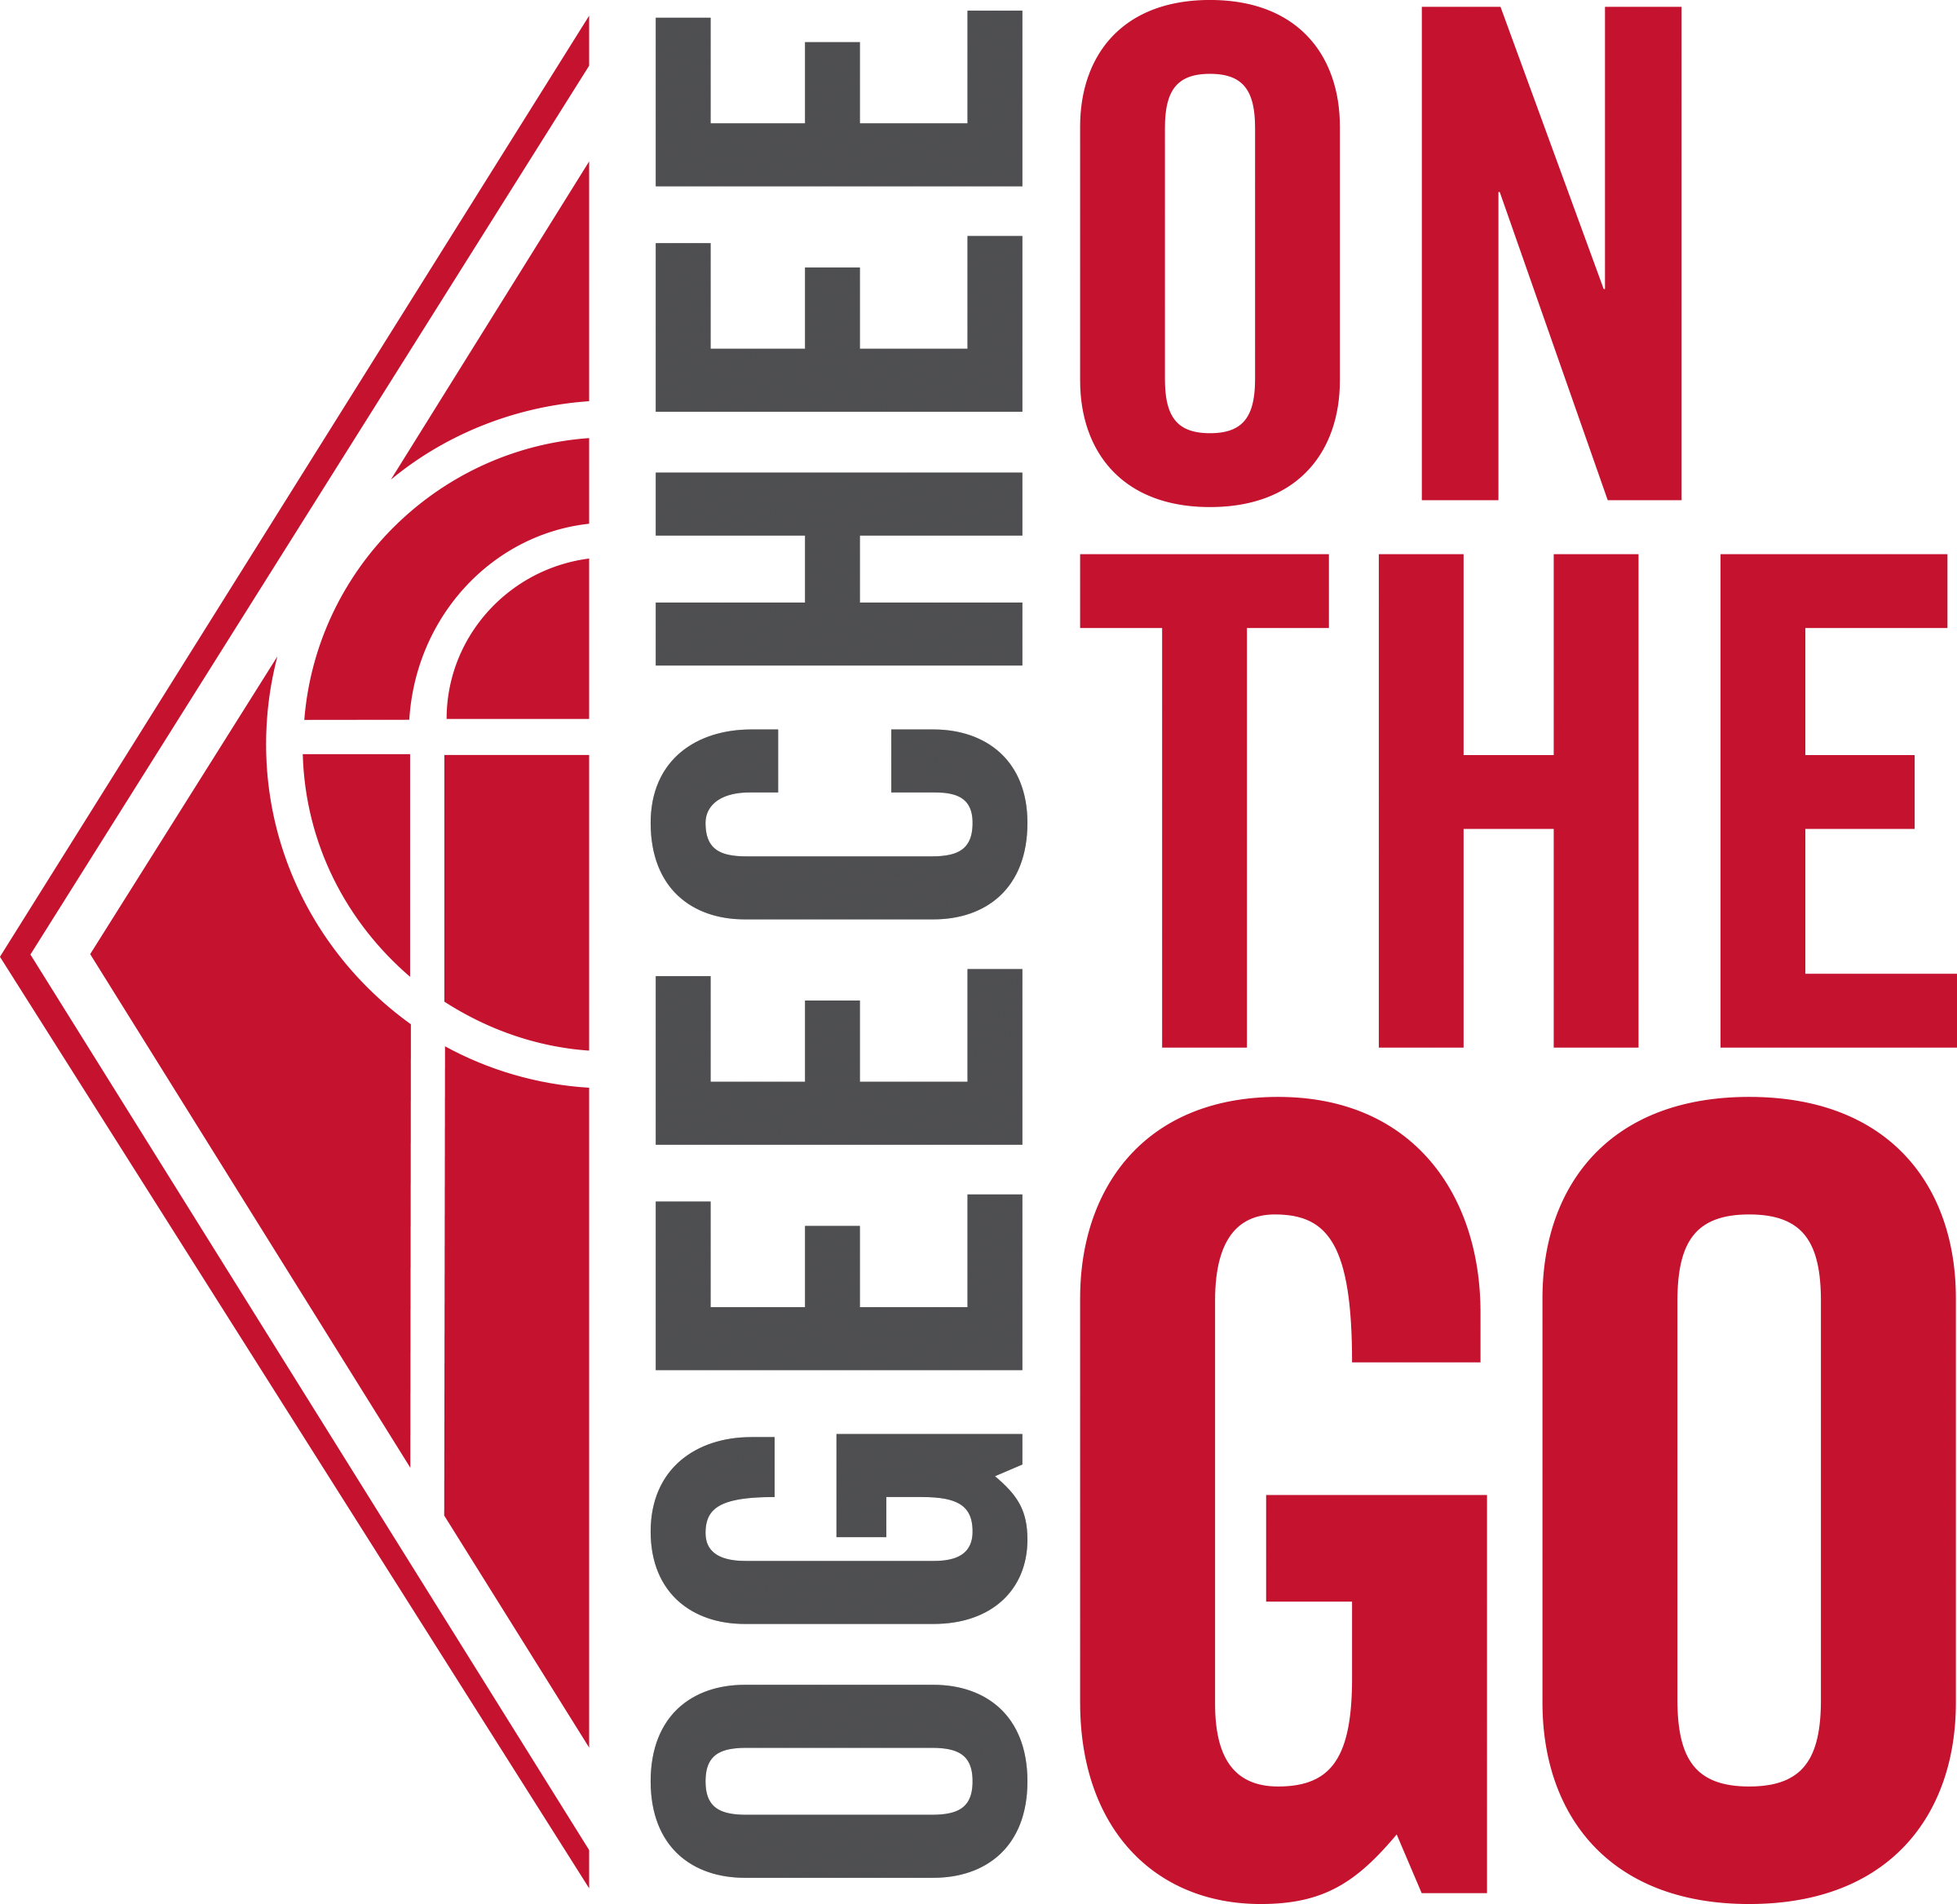 Ogeechee on the Go serves local soup kitchen